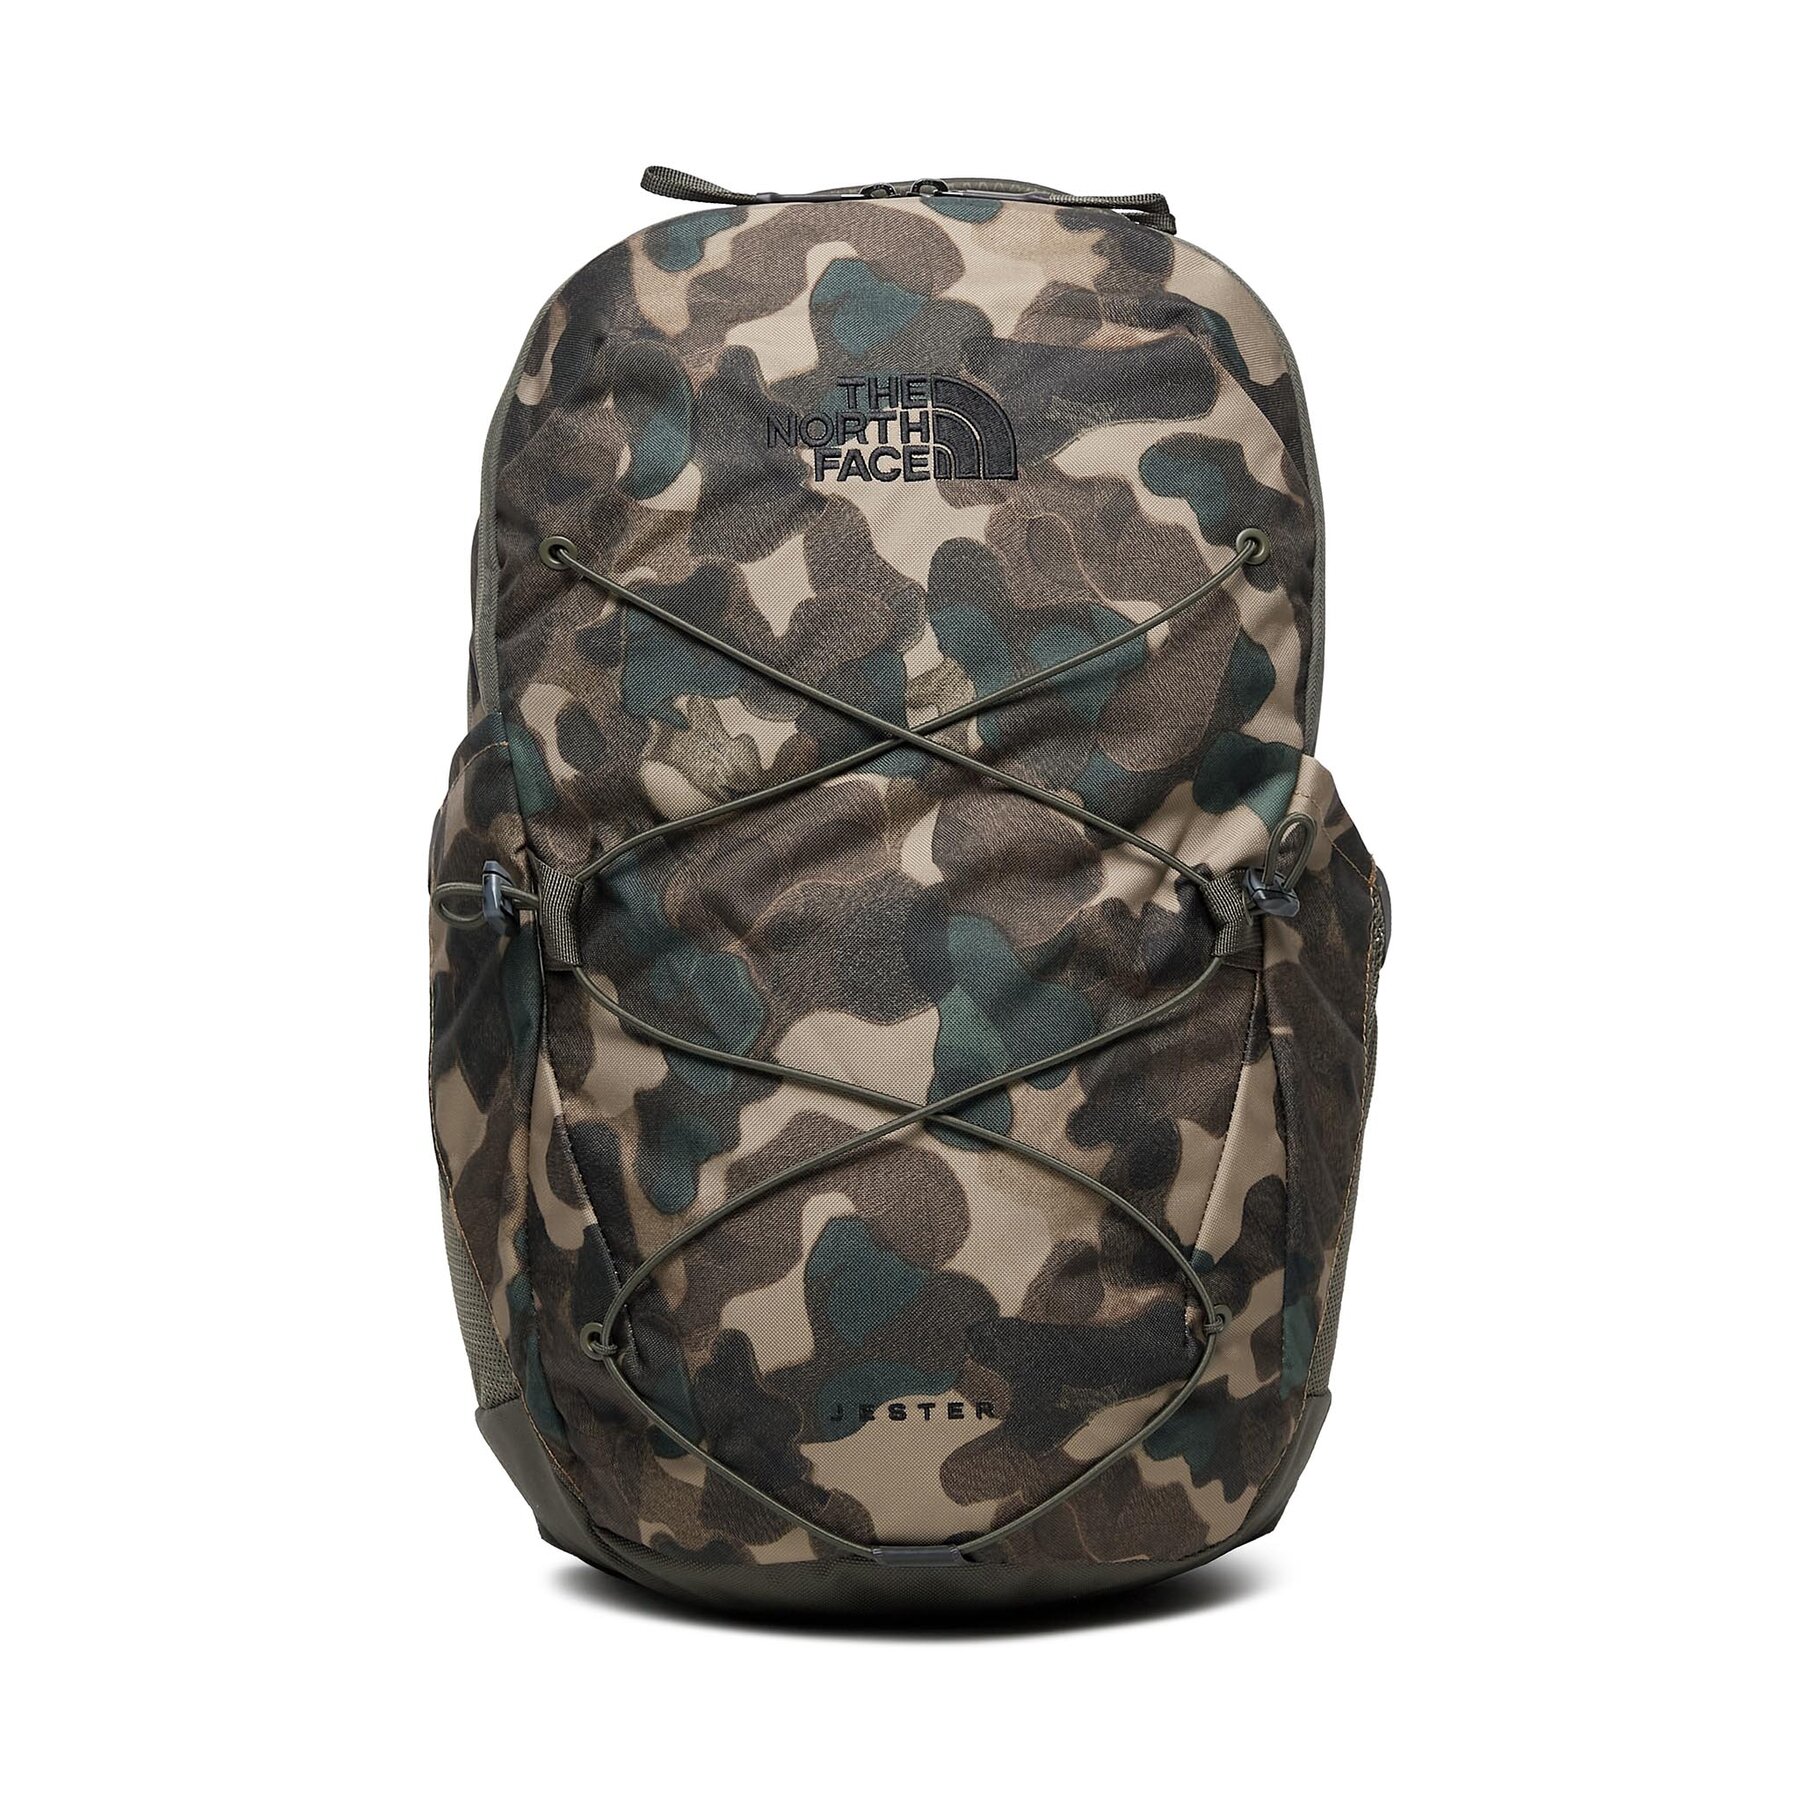 Rucksack The North Face JesterNF0A3VXFO861 Utility Brown Camo Text von The North Face